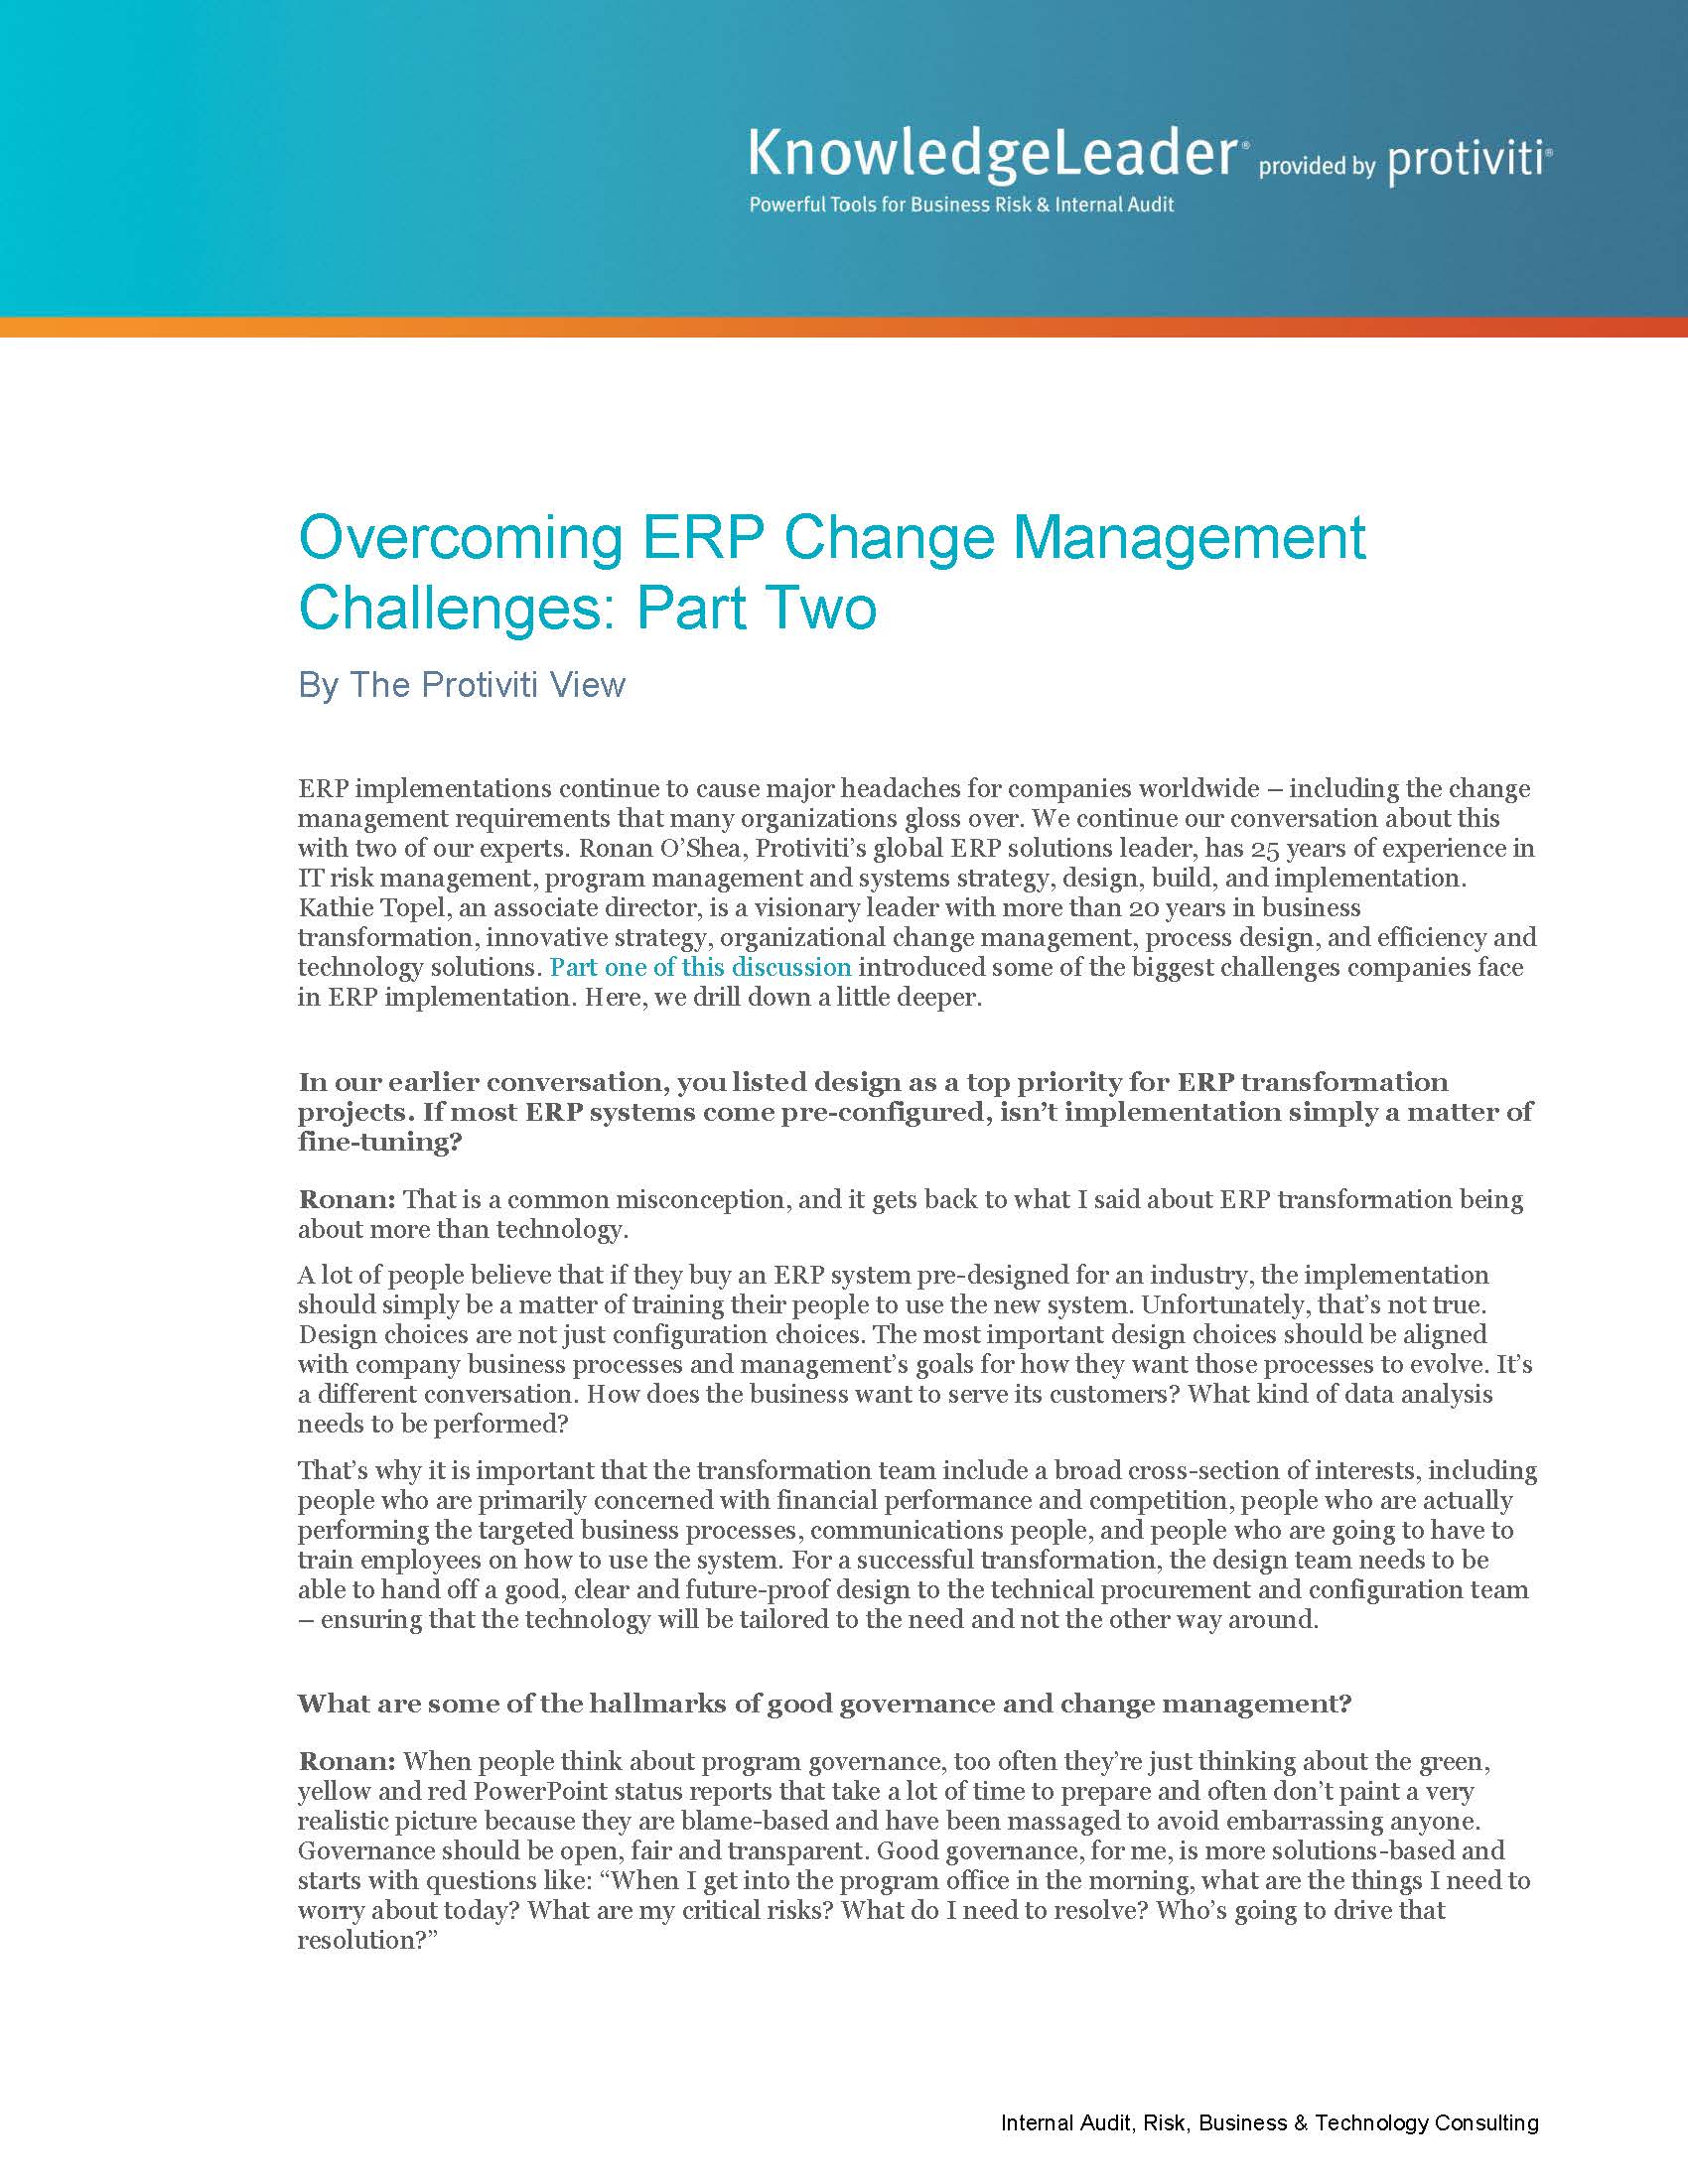 Screenshot of the first page of Overcoming ERP Change Management Challenges Part Two